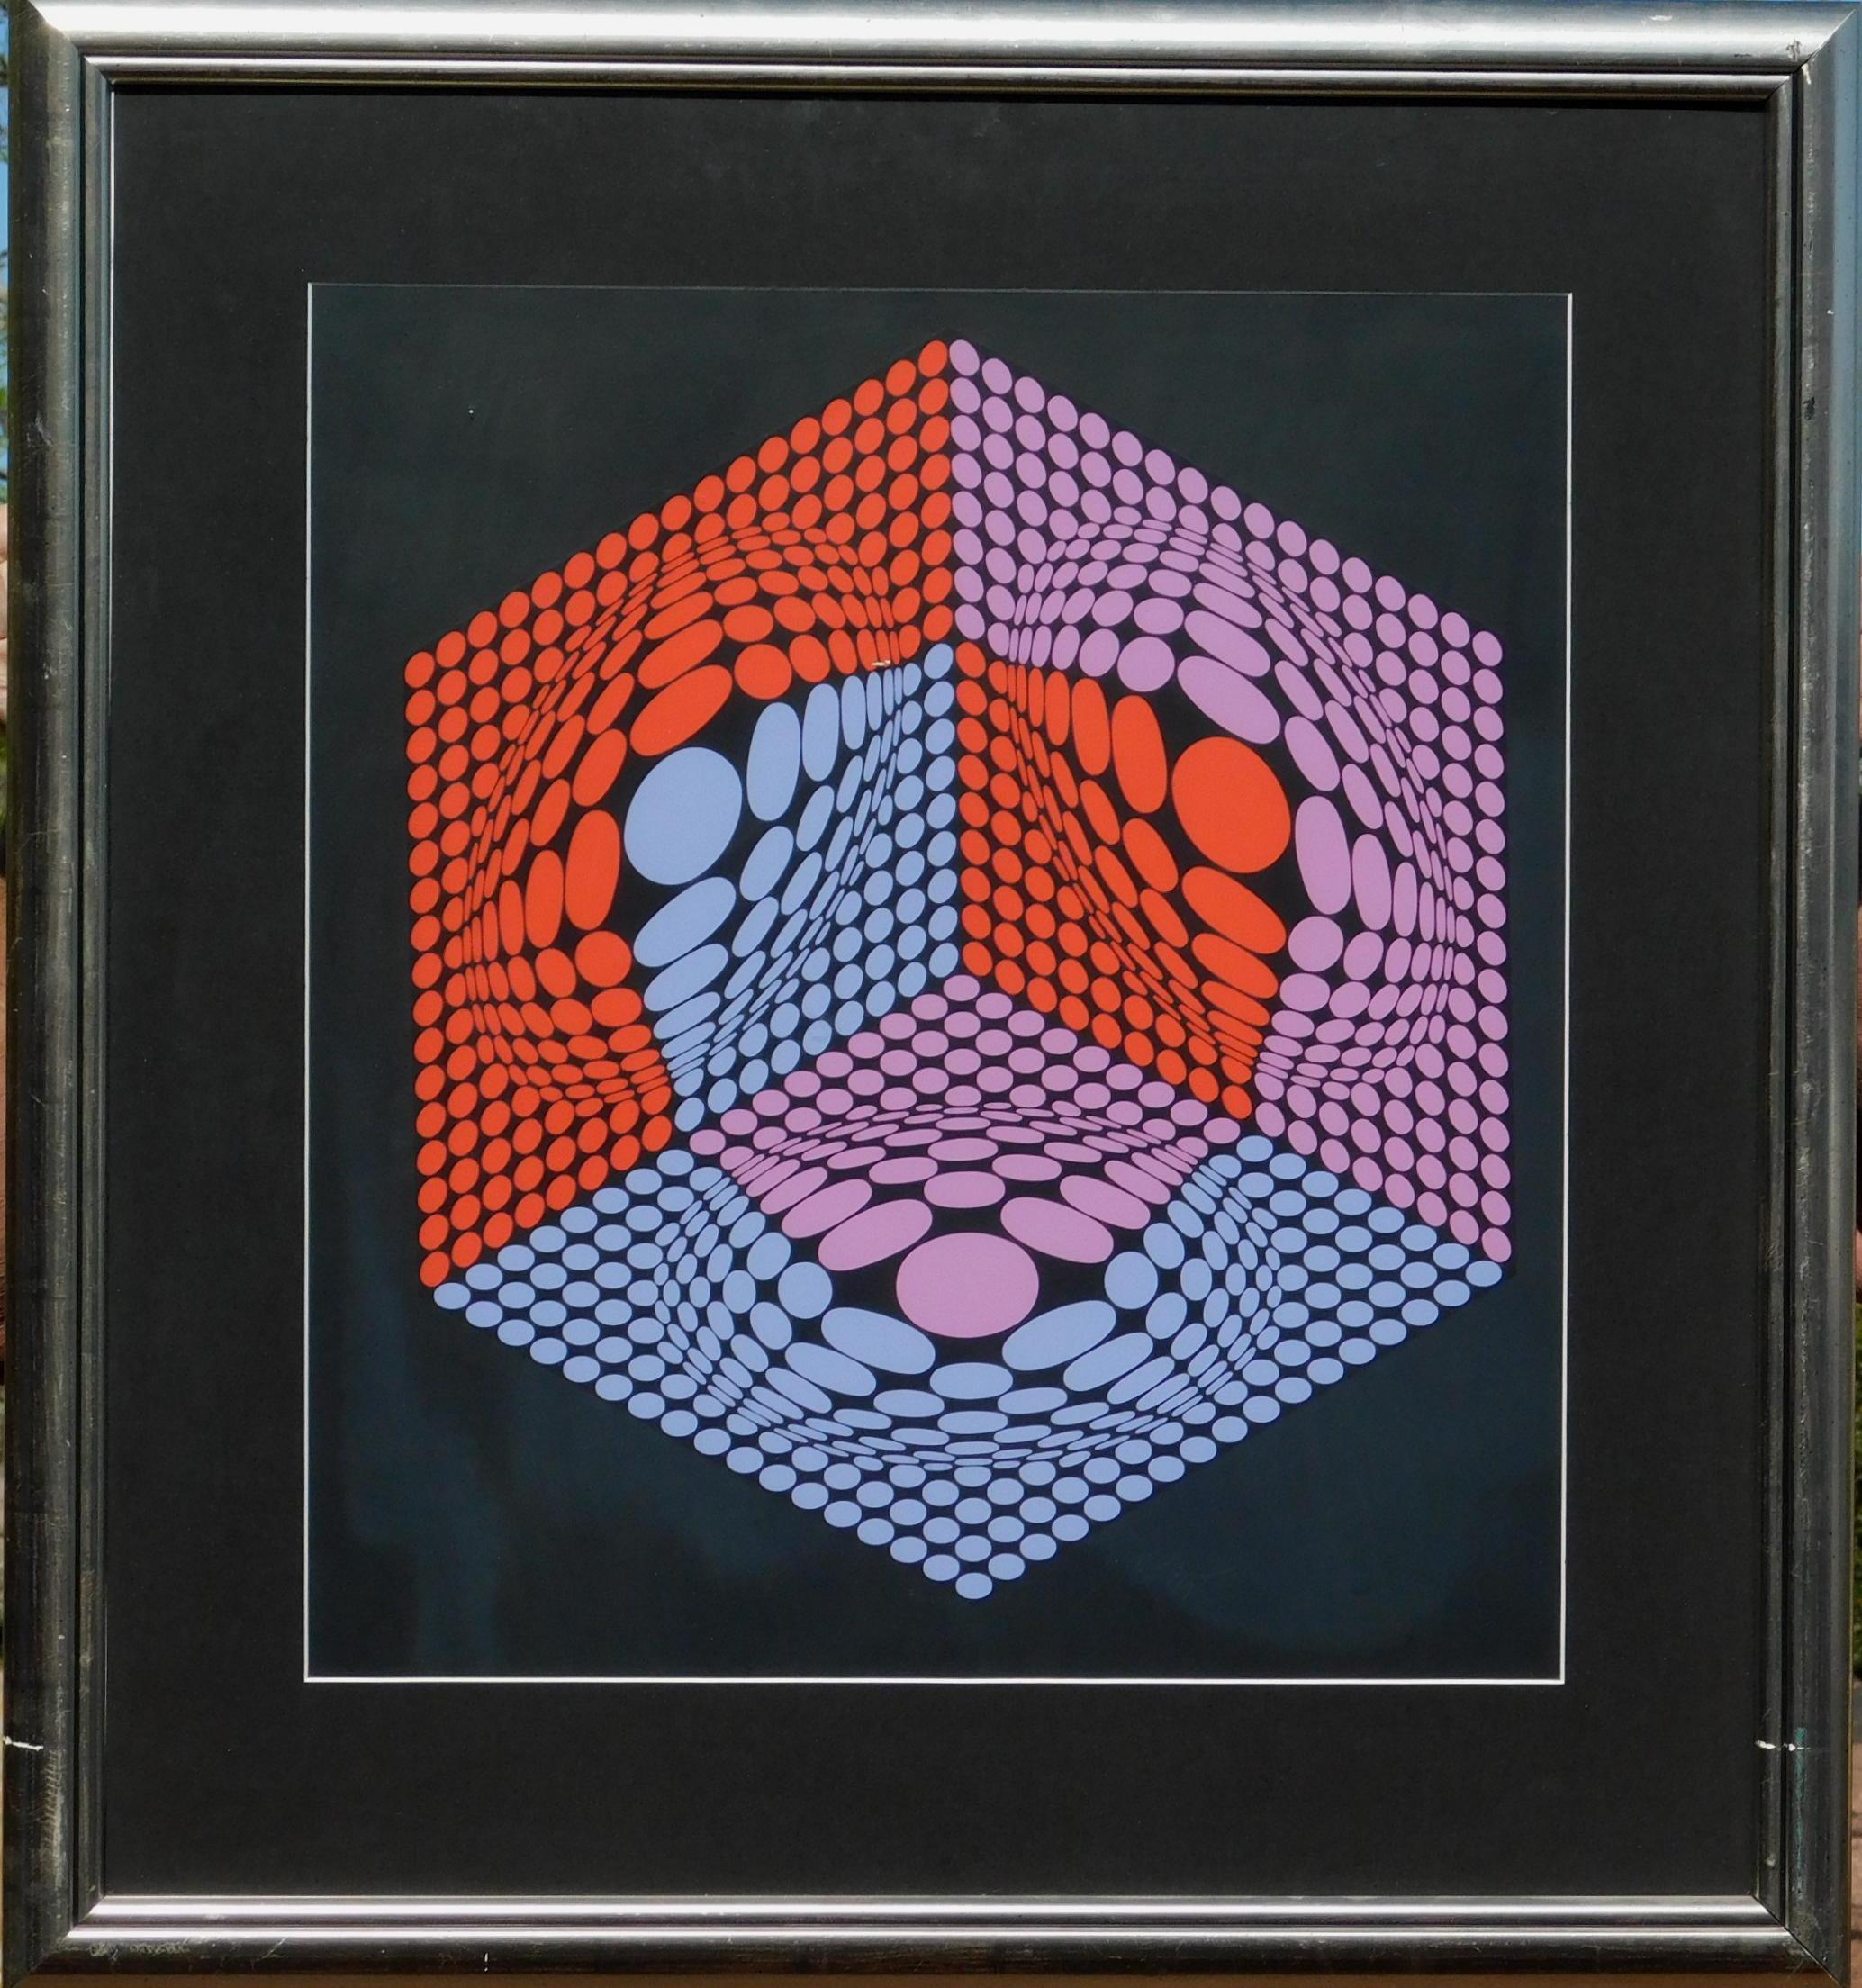 Wonderful serigraph in color on black light cardboard, created circa 1970's.
By French/Hungarian artist Victor Vasarely, considered the father of Op Art.
This work is in excellent condition, archivally matted and beautifully framed.
The image is